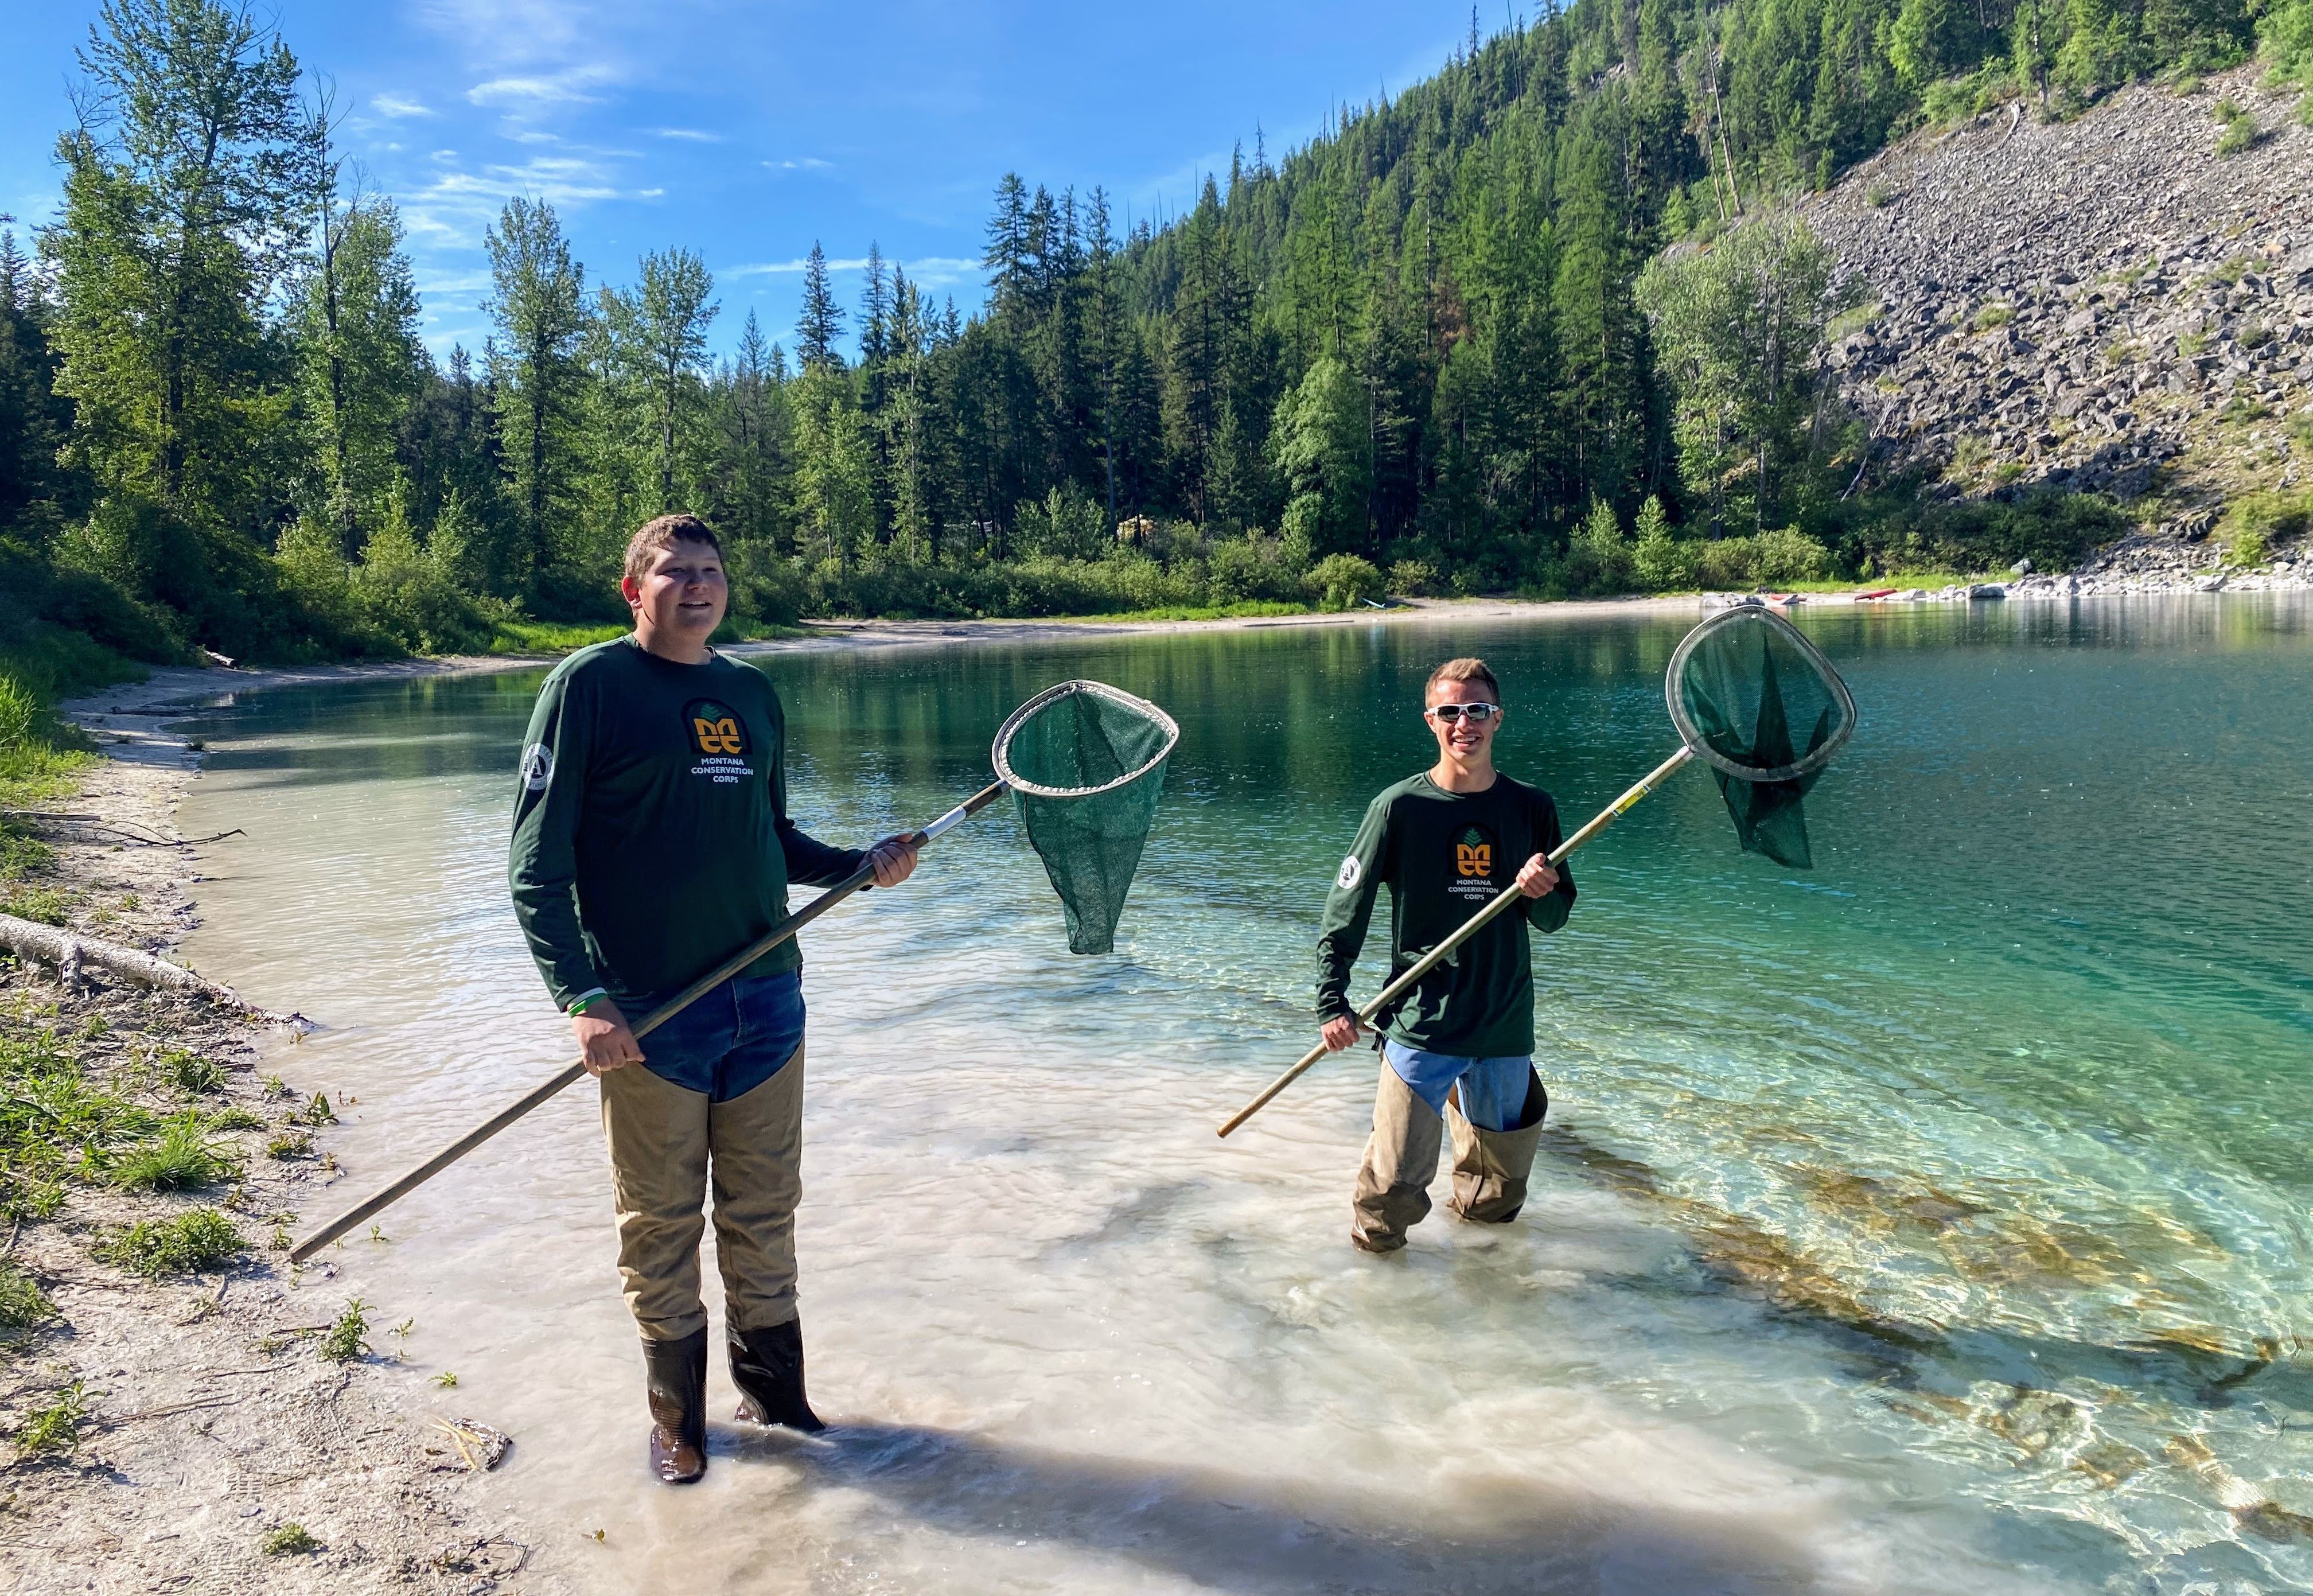 [Image Description: Two MCC members are wading into a bright blue lake. They are both wearing their MCC shirts and waders, holding nets for specimen collection.]